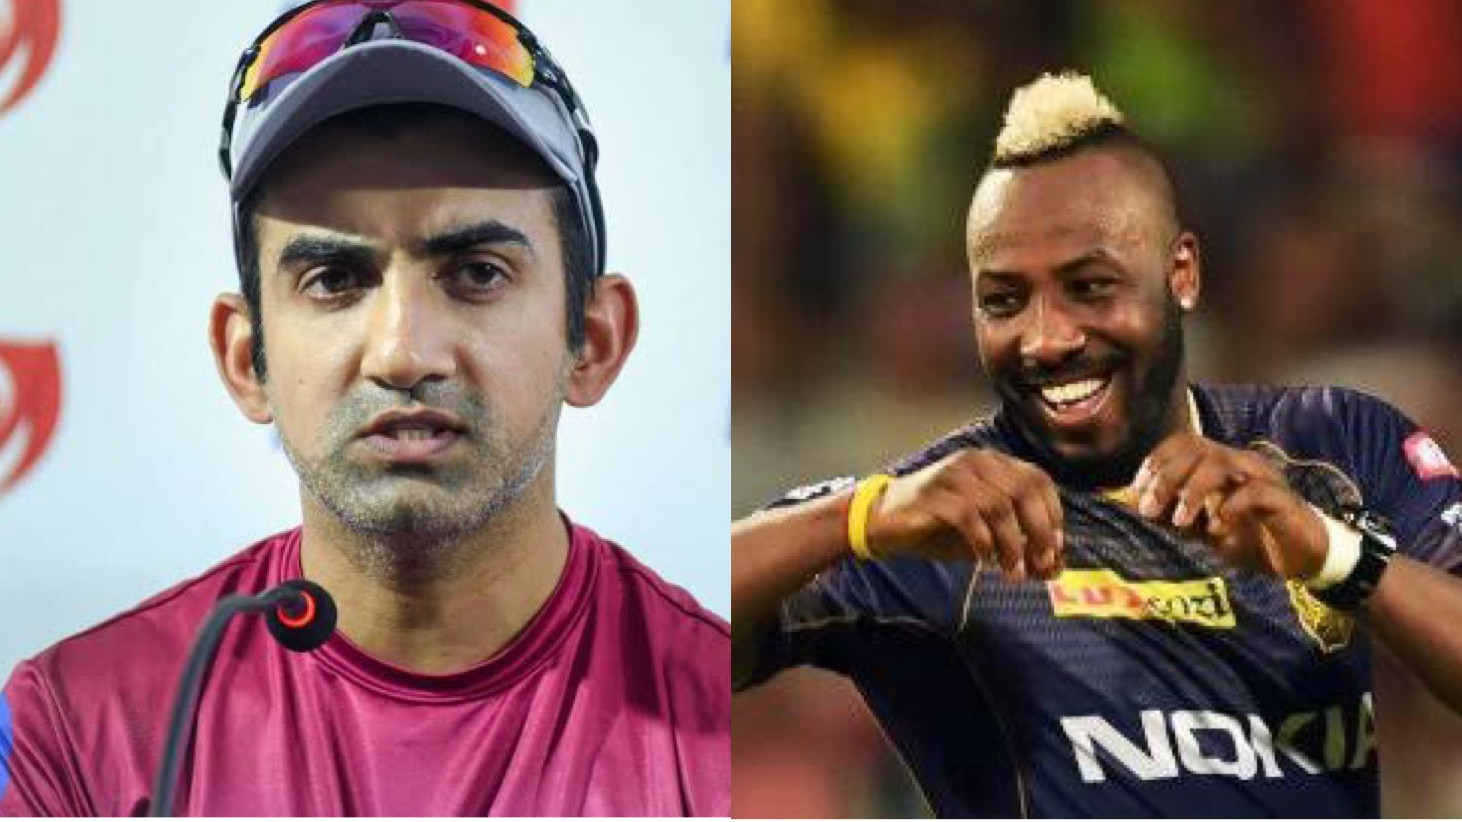 IPL 2021: KKR needs a backup for Andre Russell because of his injury issues, says Gautam Gambhir 